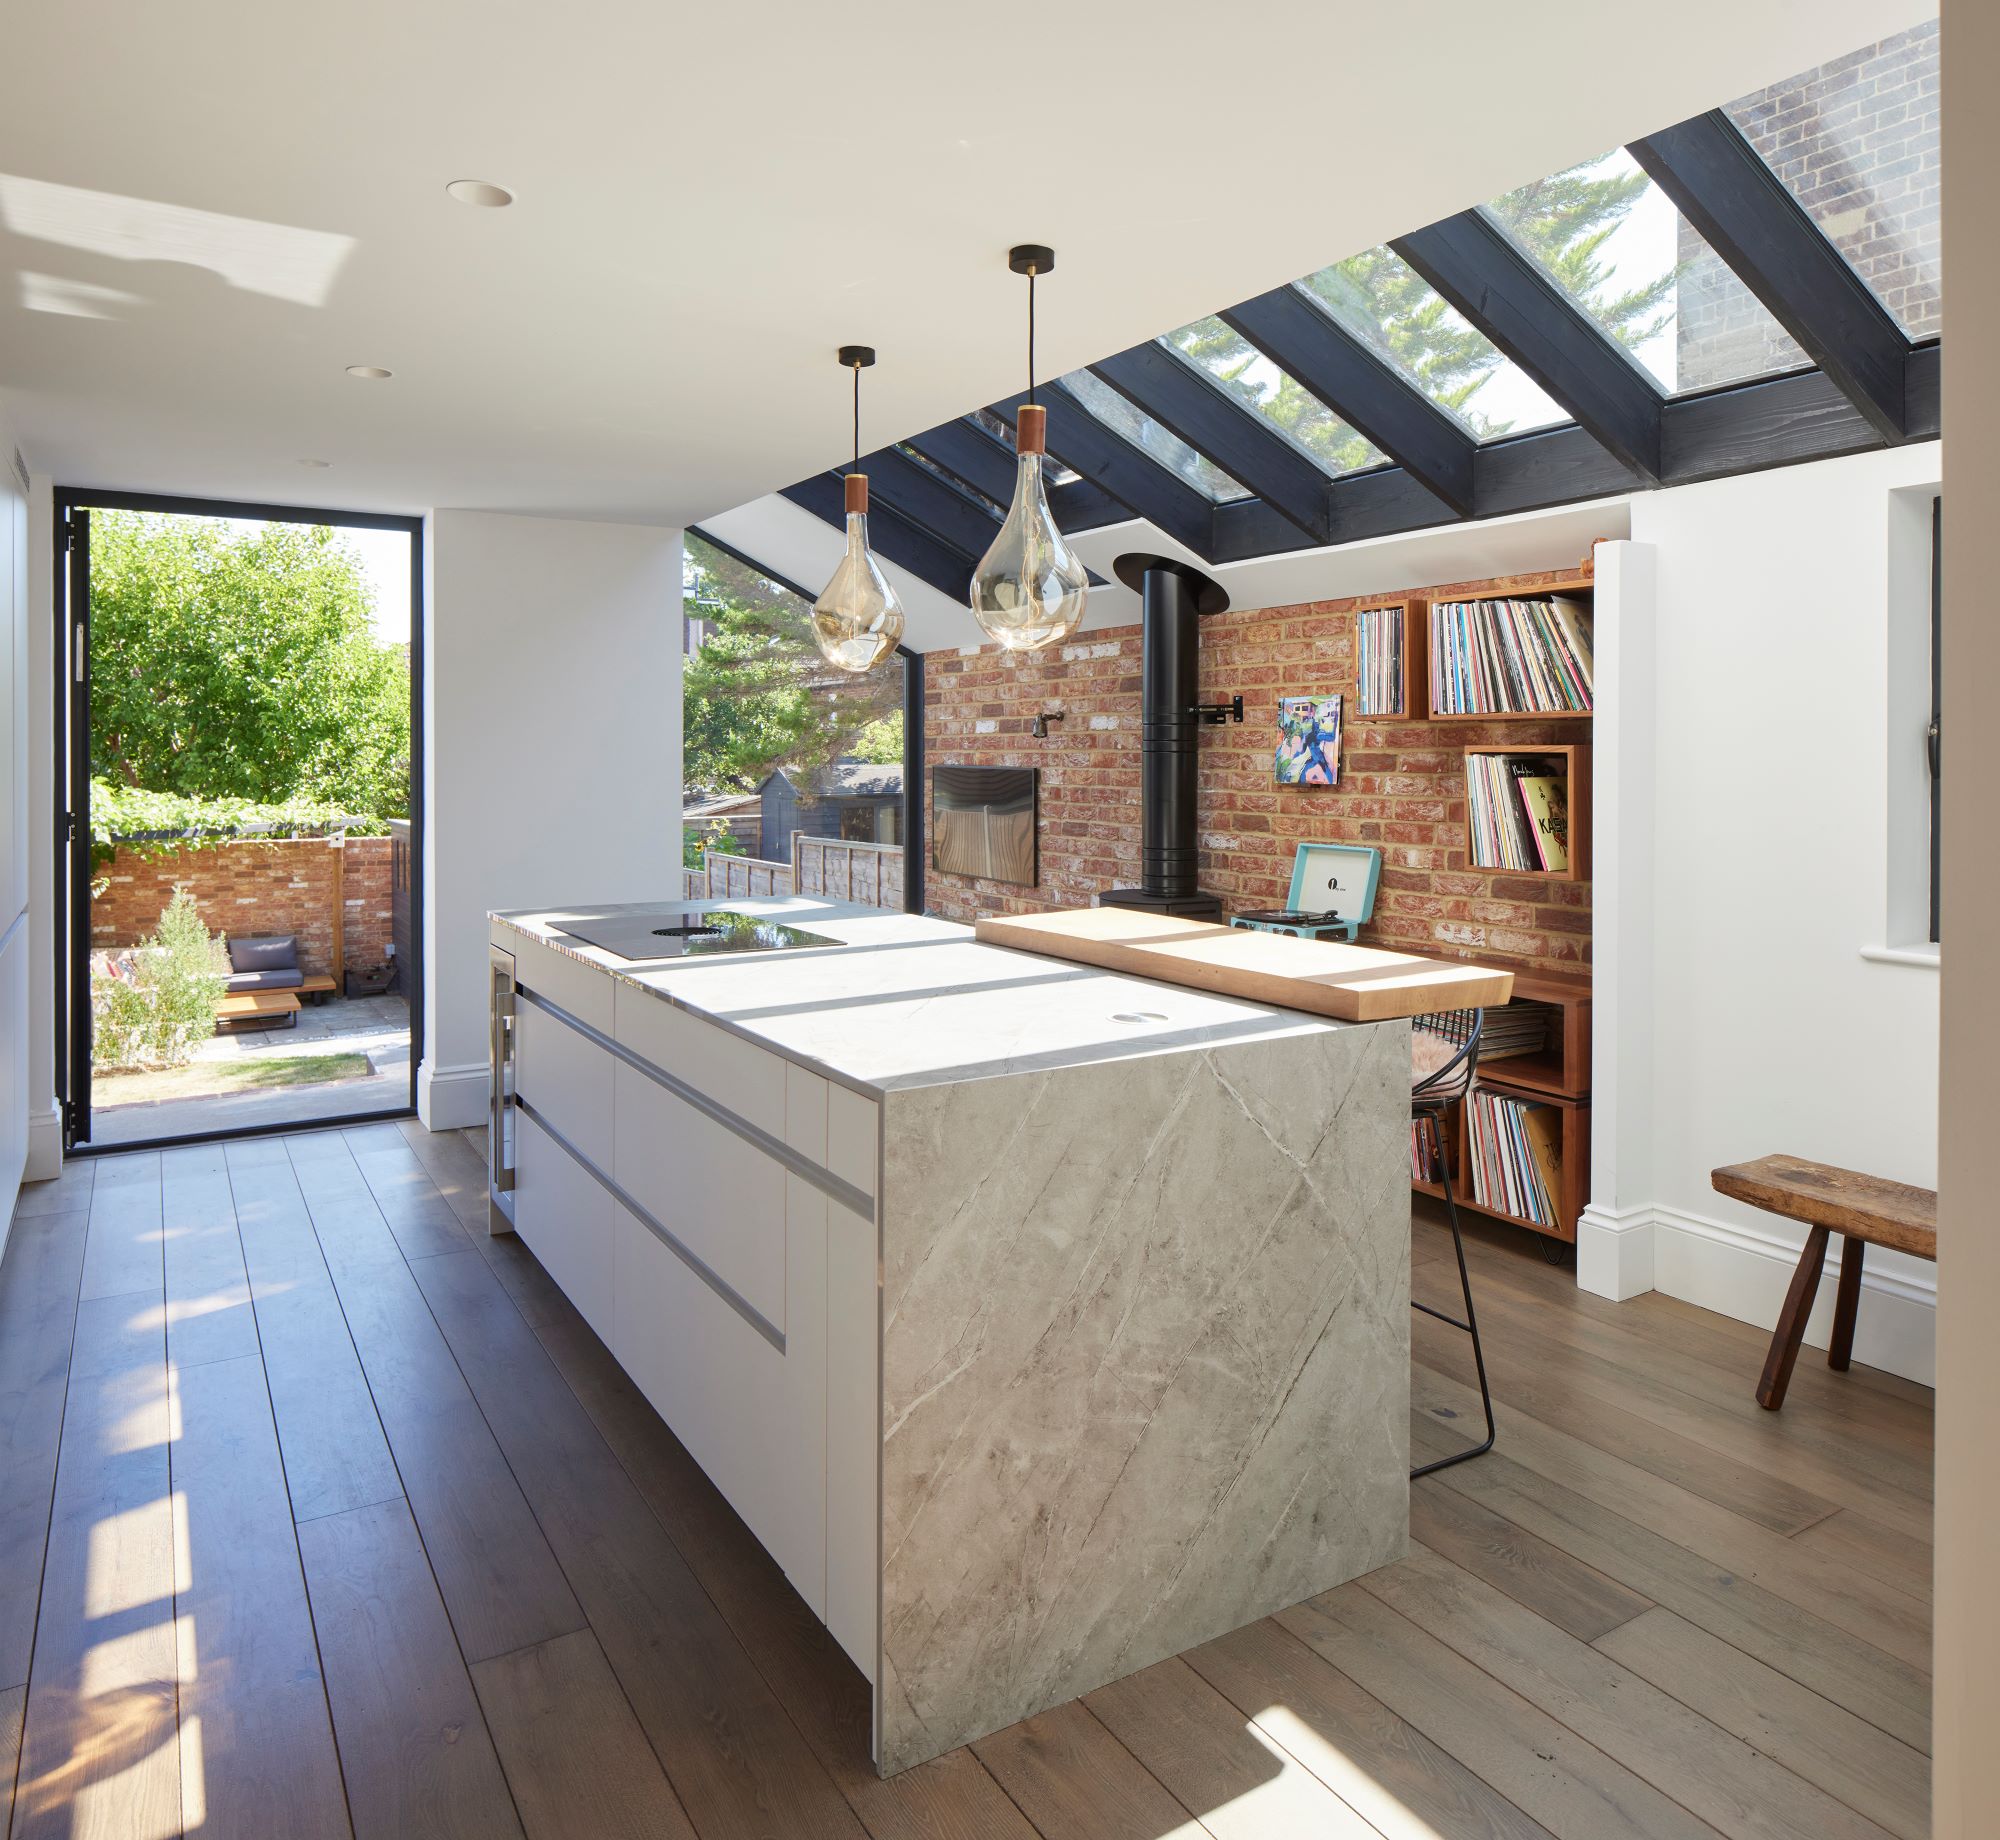 Kitchen extension by FMB member Houghton Lewis Group Ltd